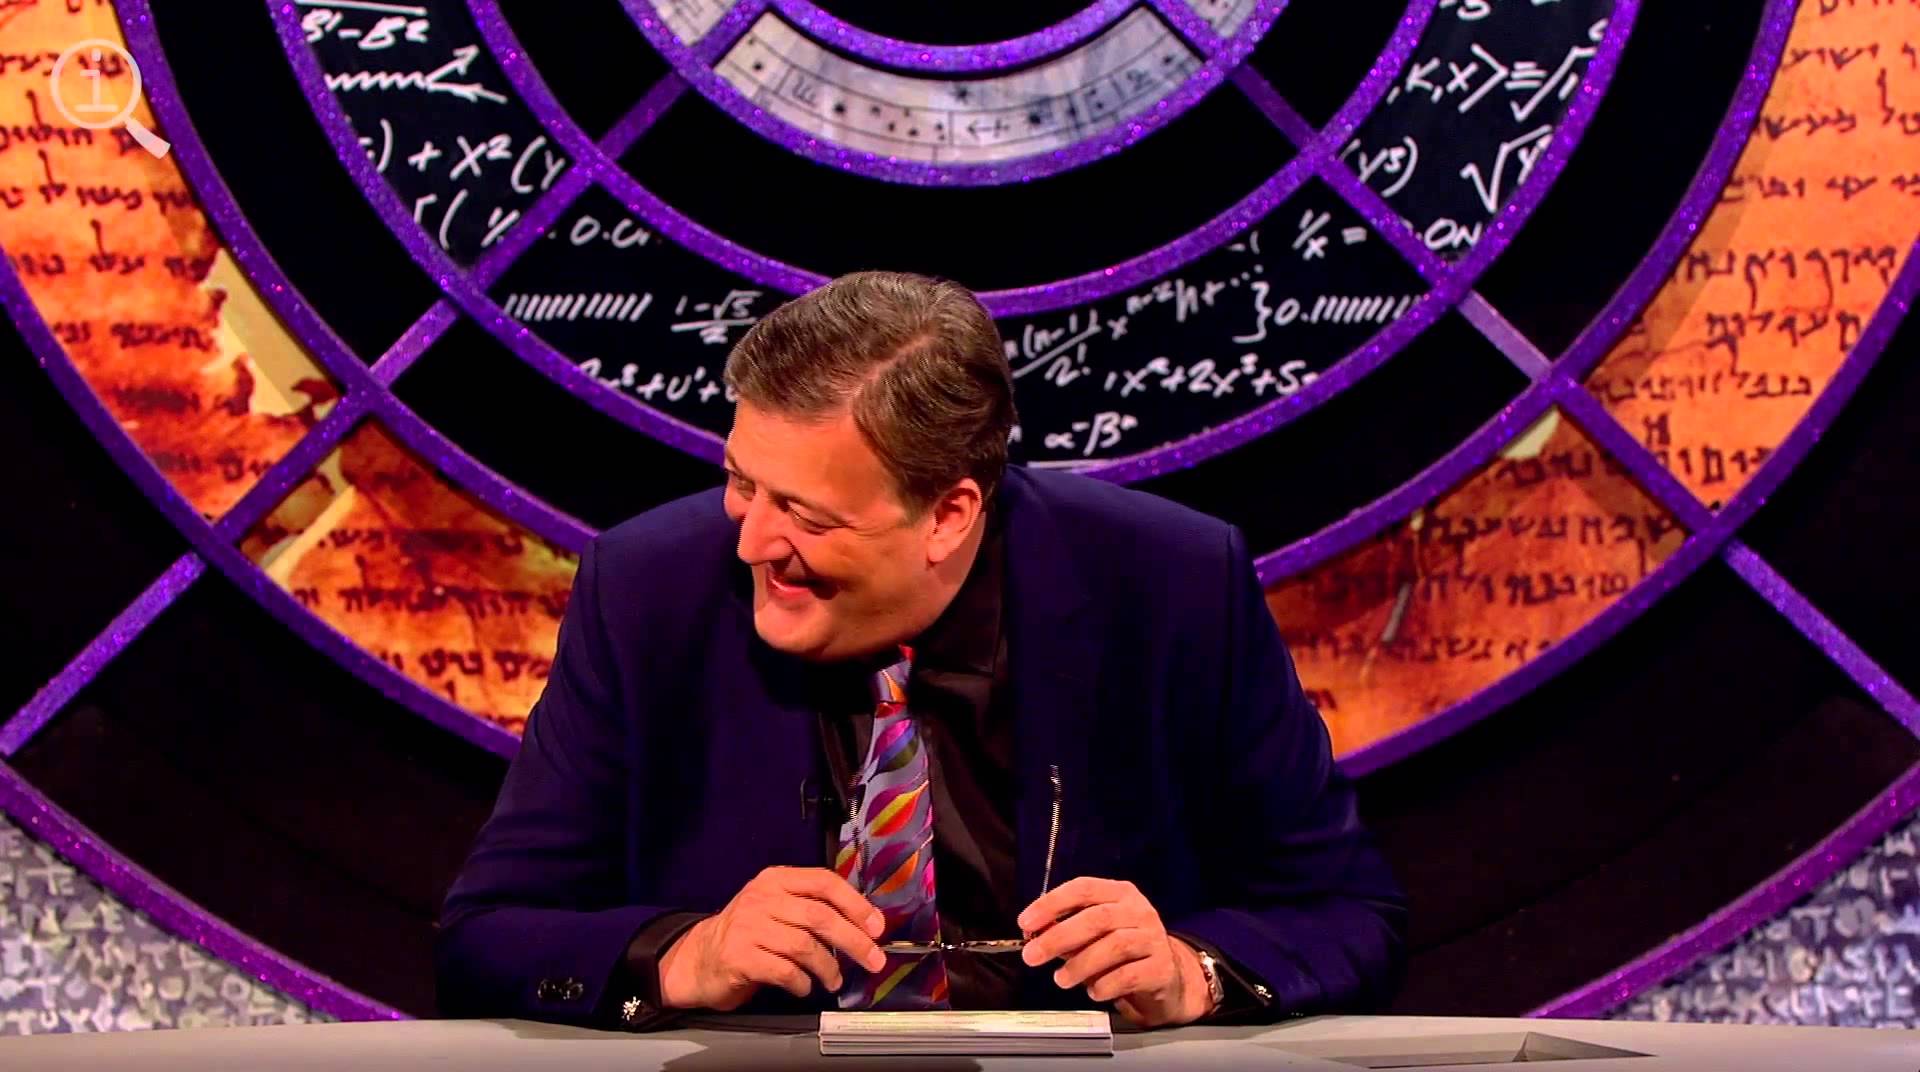 Stephen Fry presenting the comedy show QI